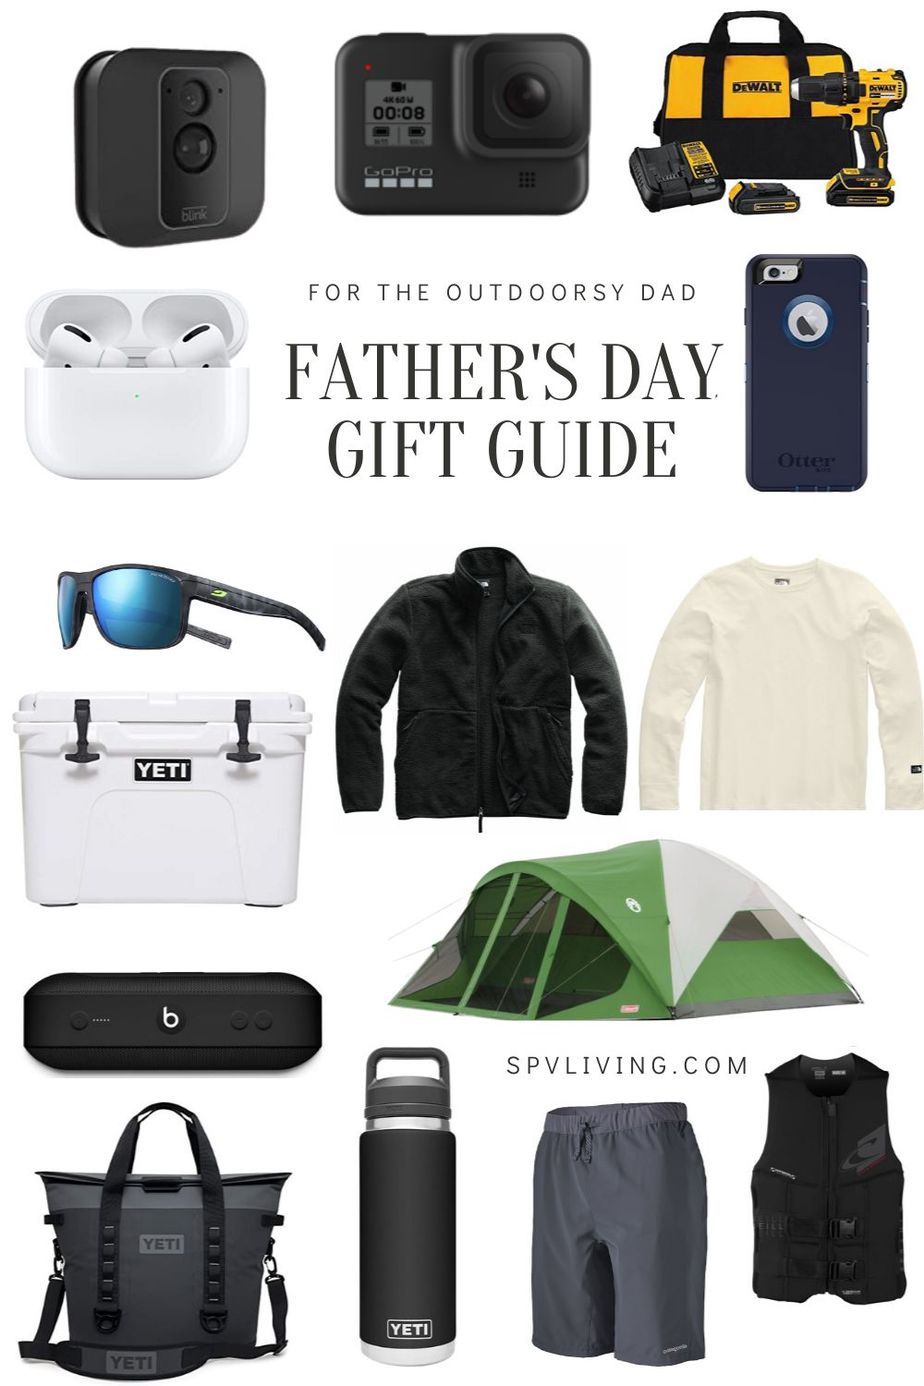 Father’s Day Gift Guide for the Outdoorsy Dad